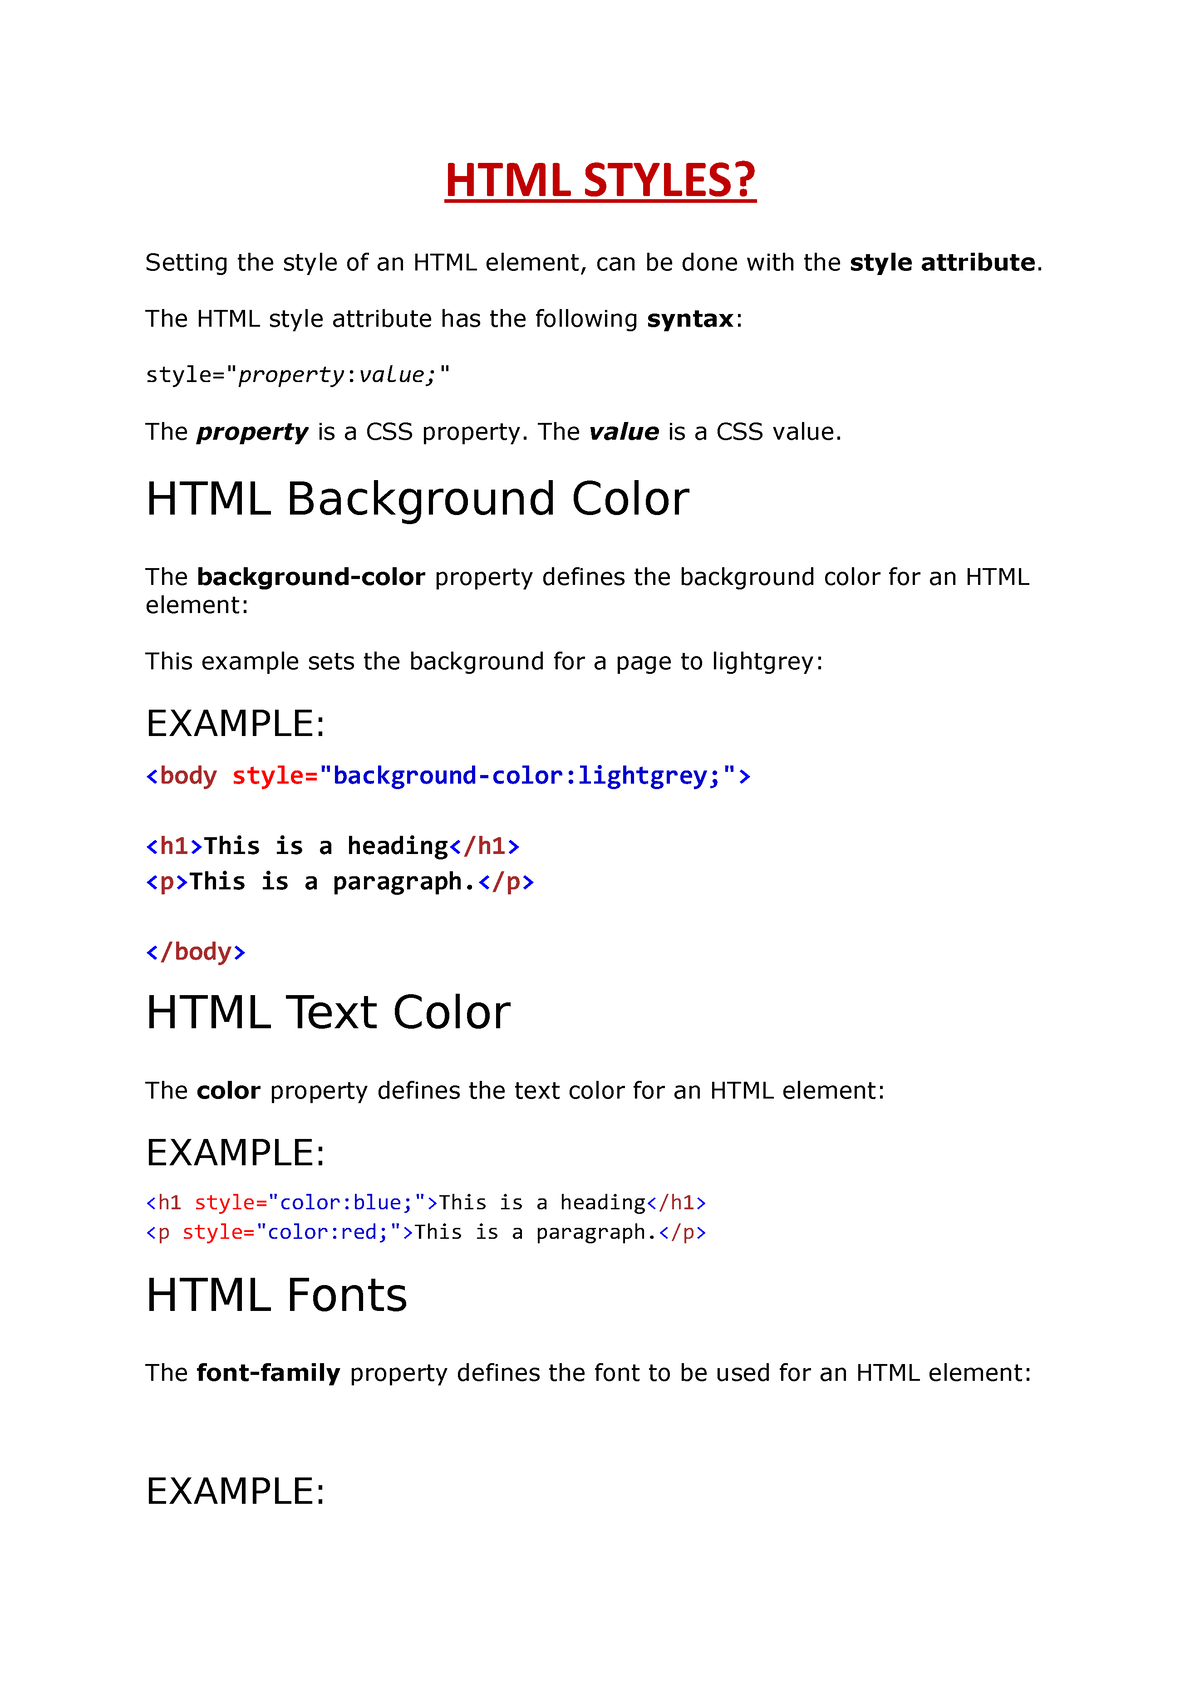 HTML Styles - Lecture notes 1 - HTML STYLES? Setting the style of an HTML  element, can be done with - Studocu